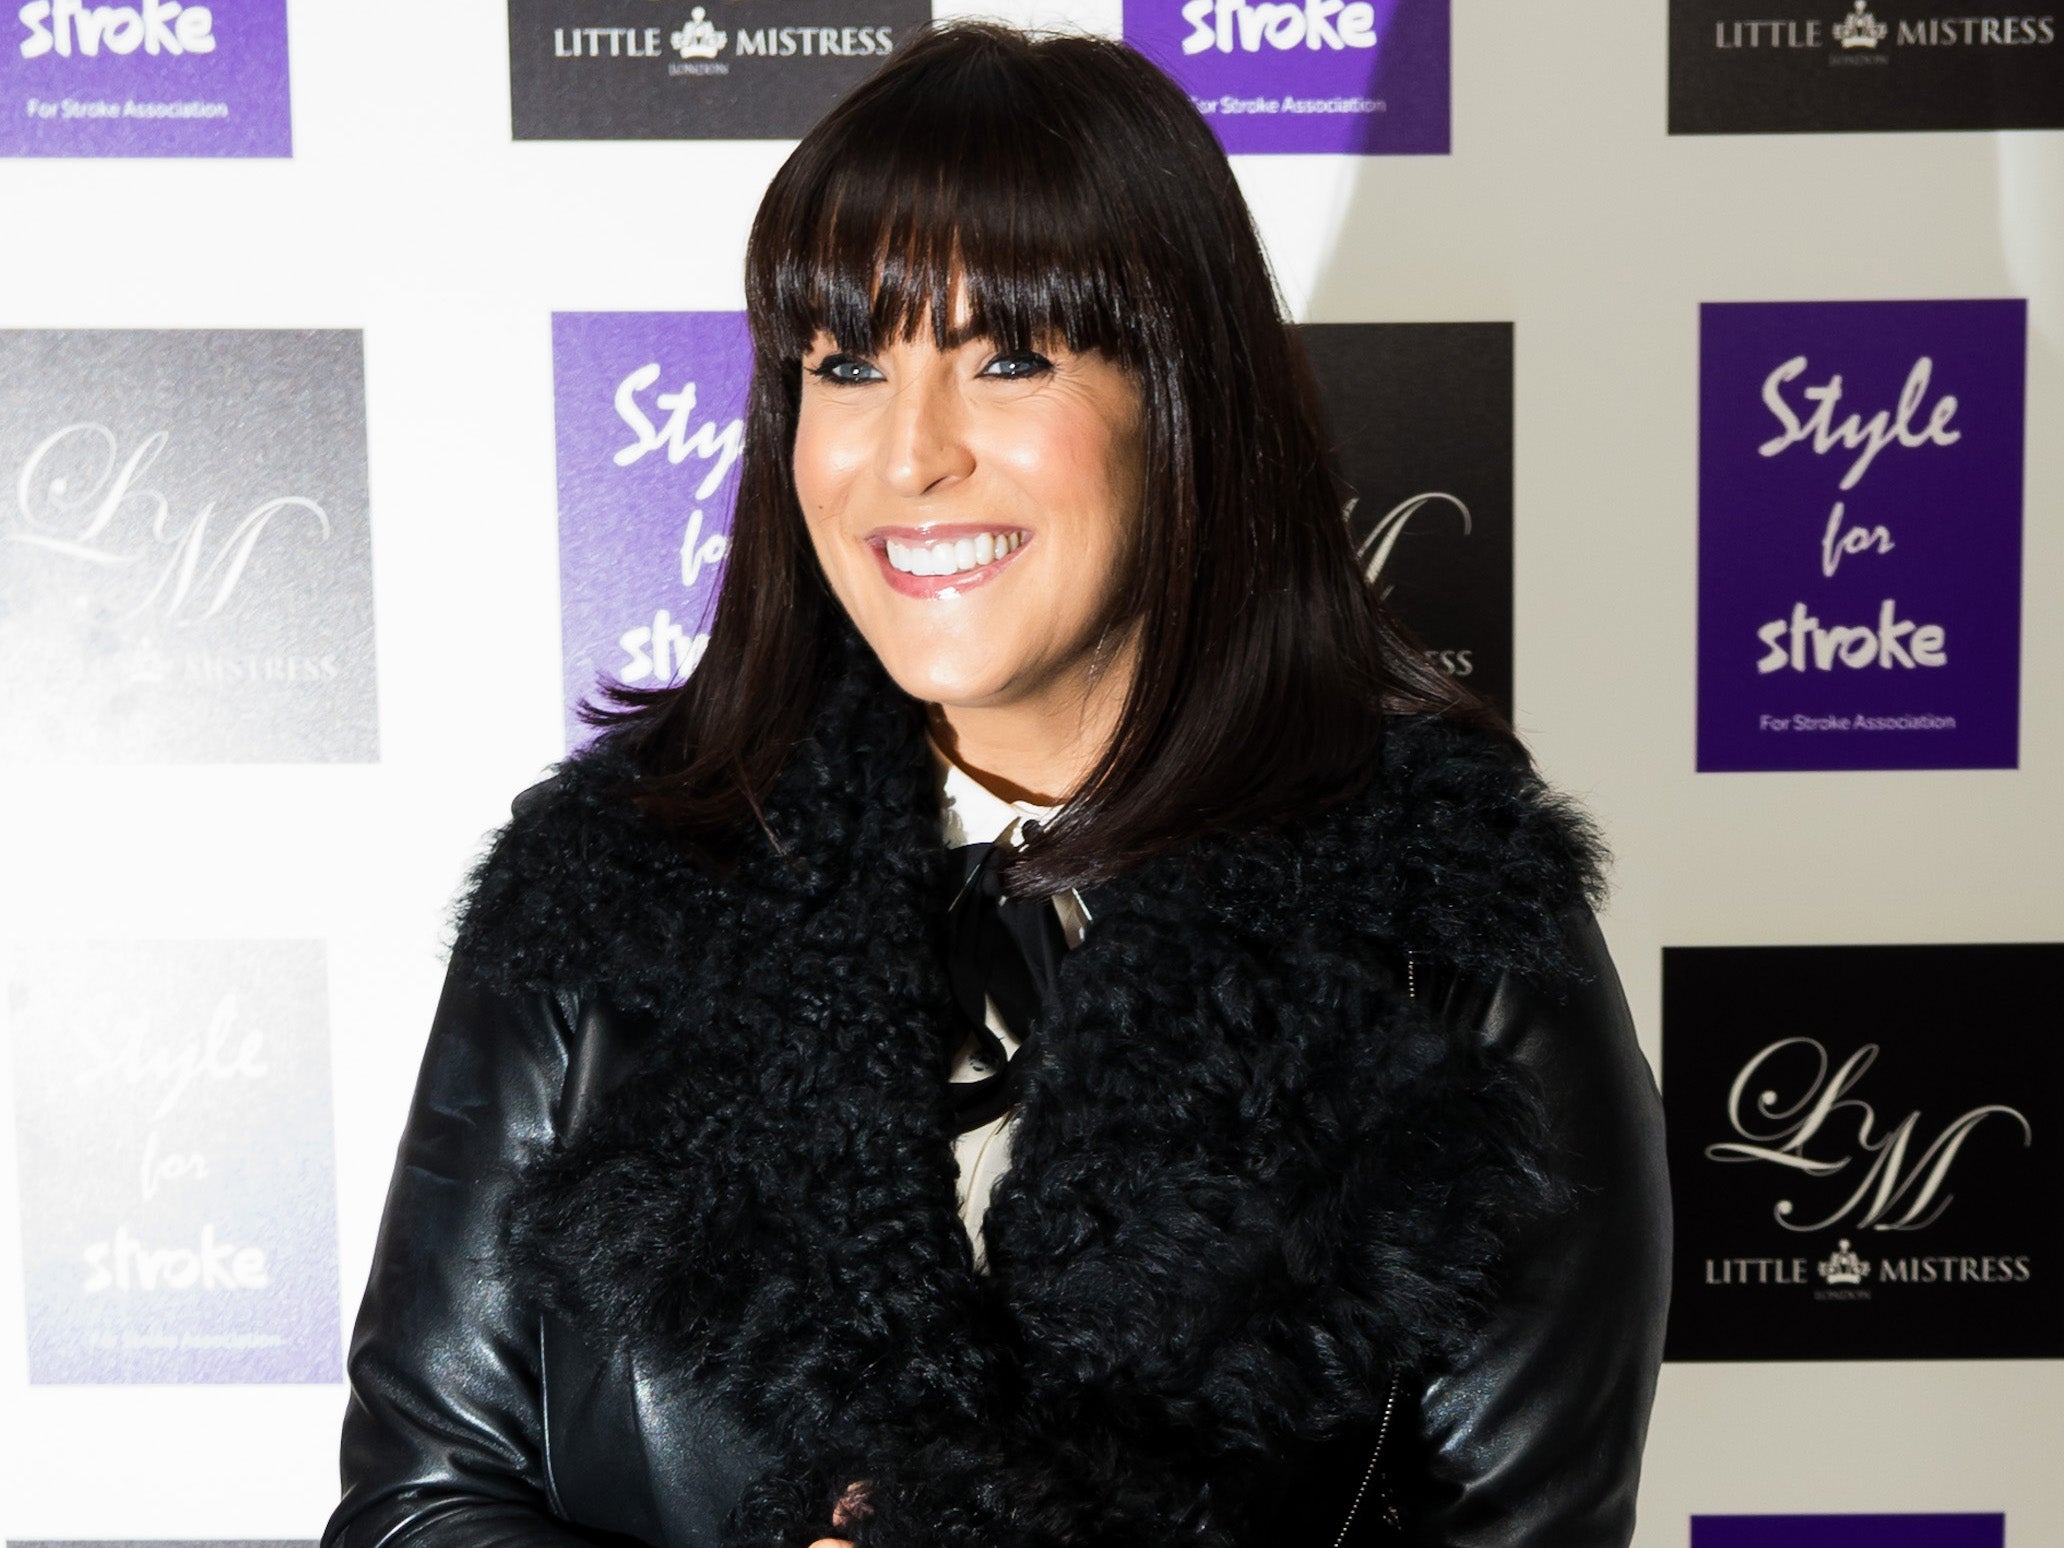 Anna Richardson naked pictures prompt journalist to warn over revenge porn  dangers | The Independent | The Independent